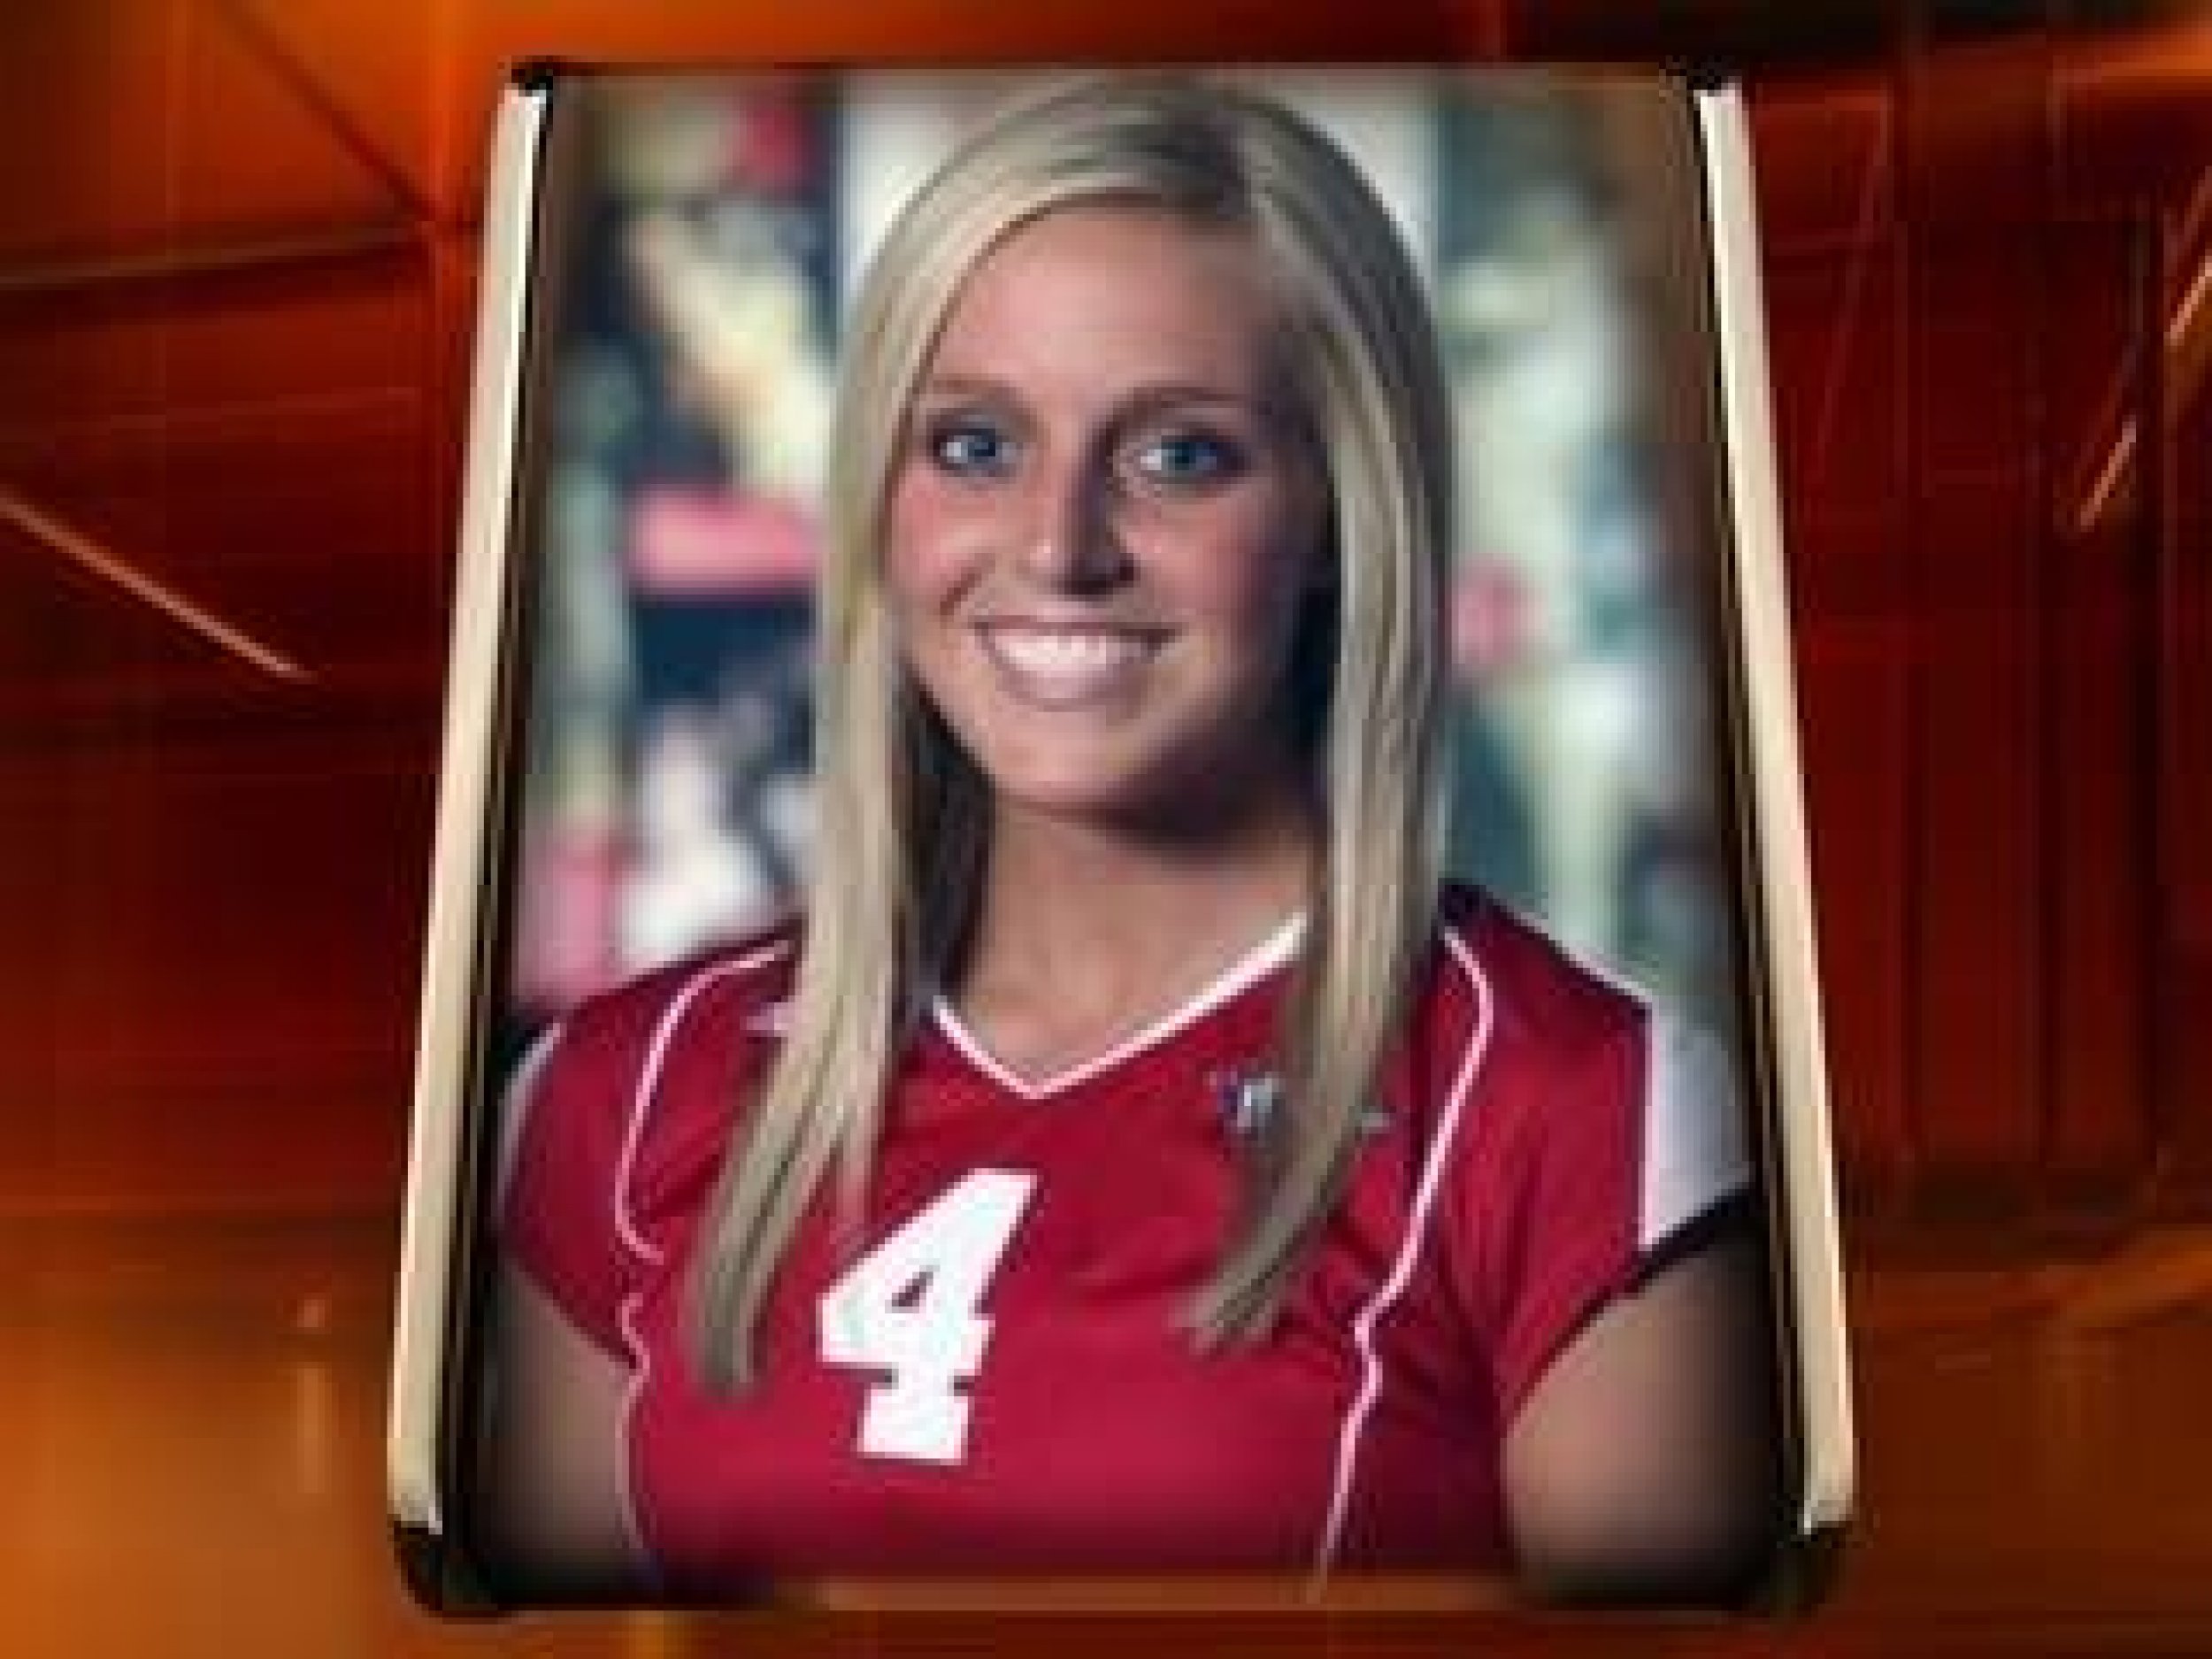 Dorrell was an All-SEC volleyball player at Arkansas in 2007.